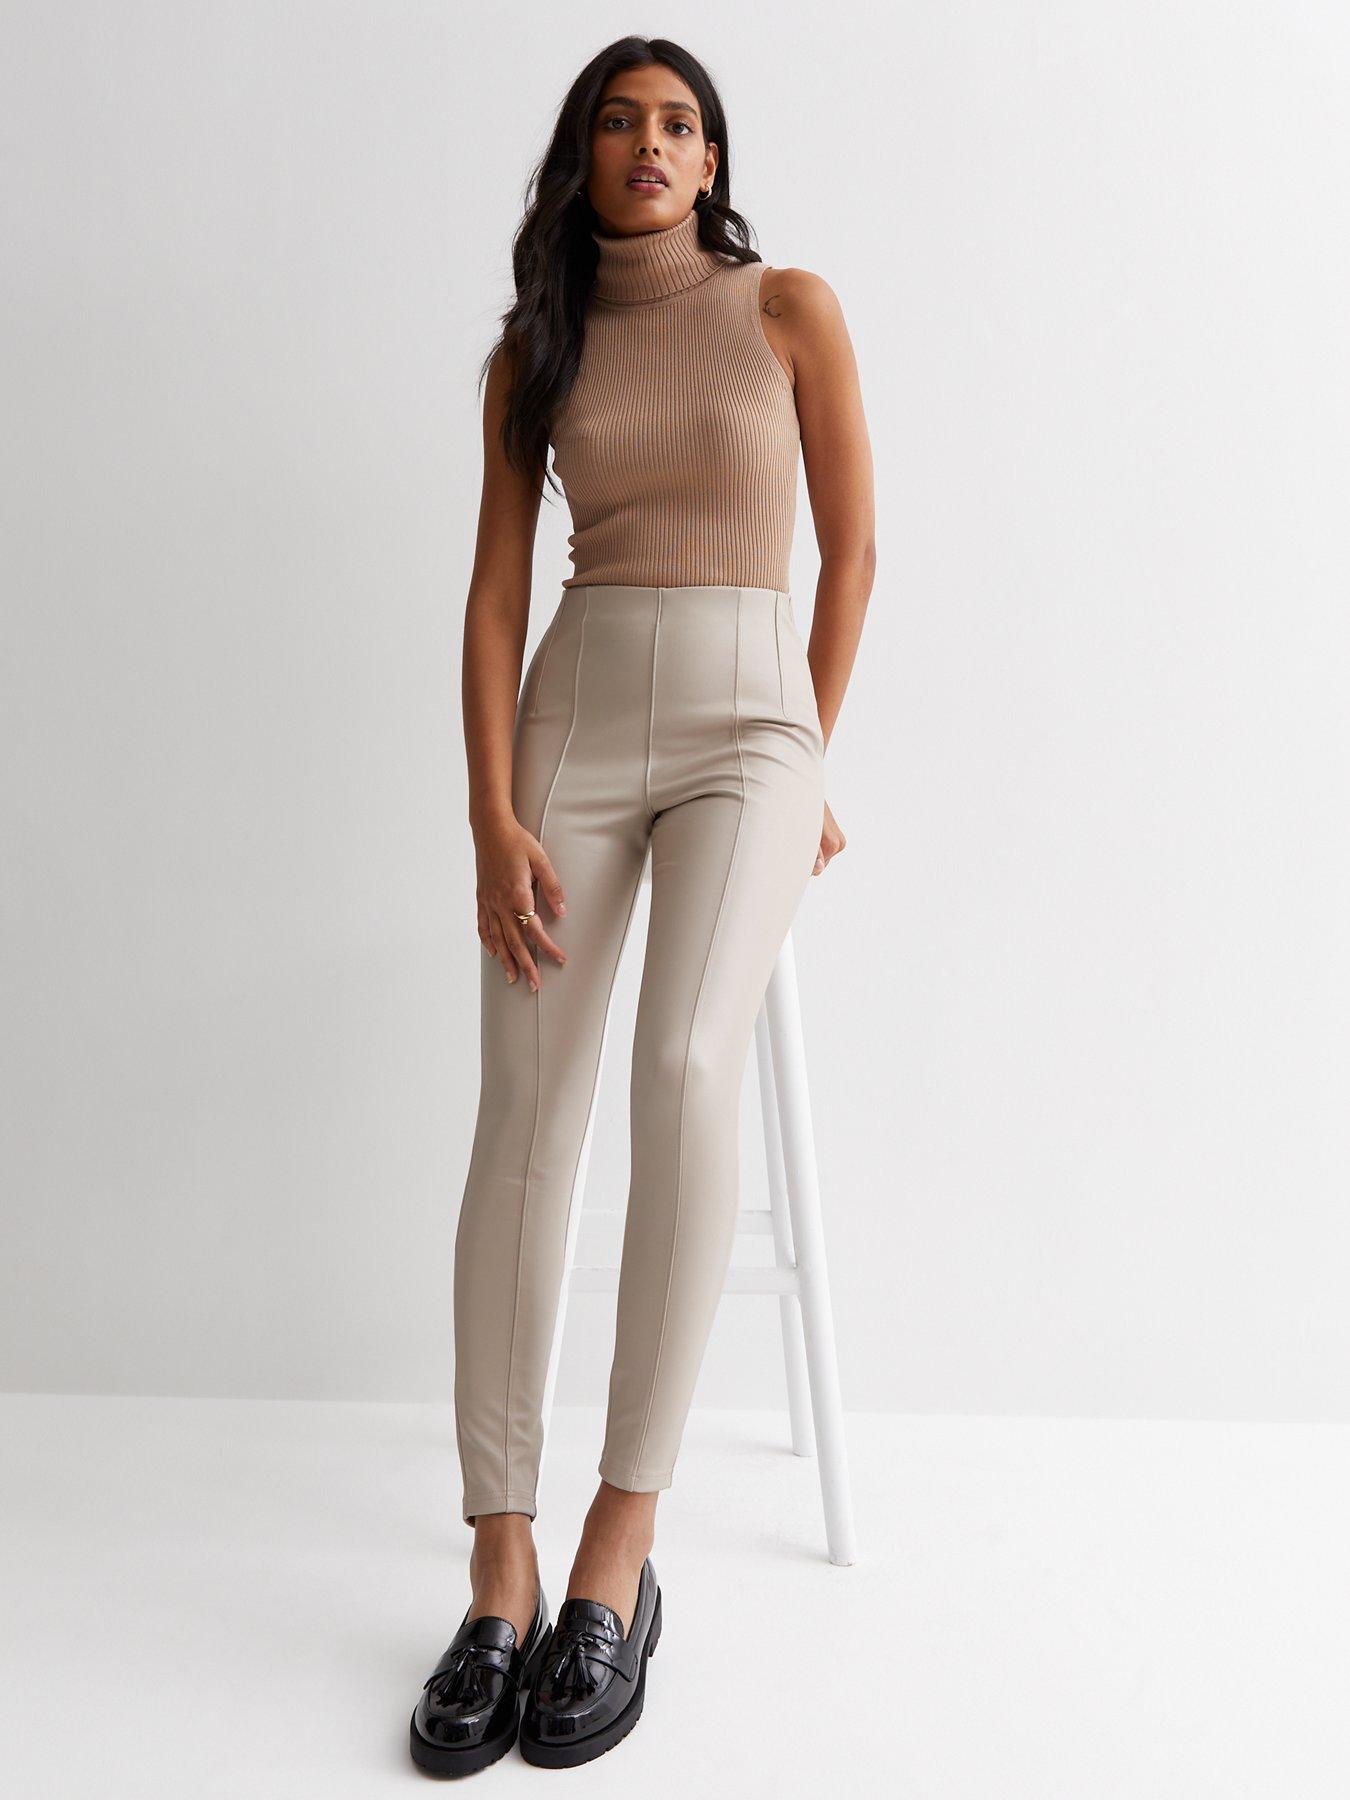 Off White Leather-Look High Waist Leggings